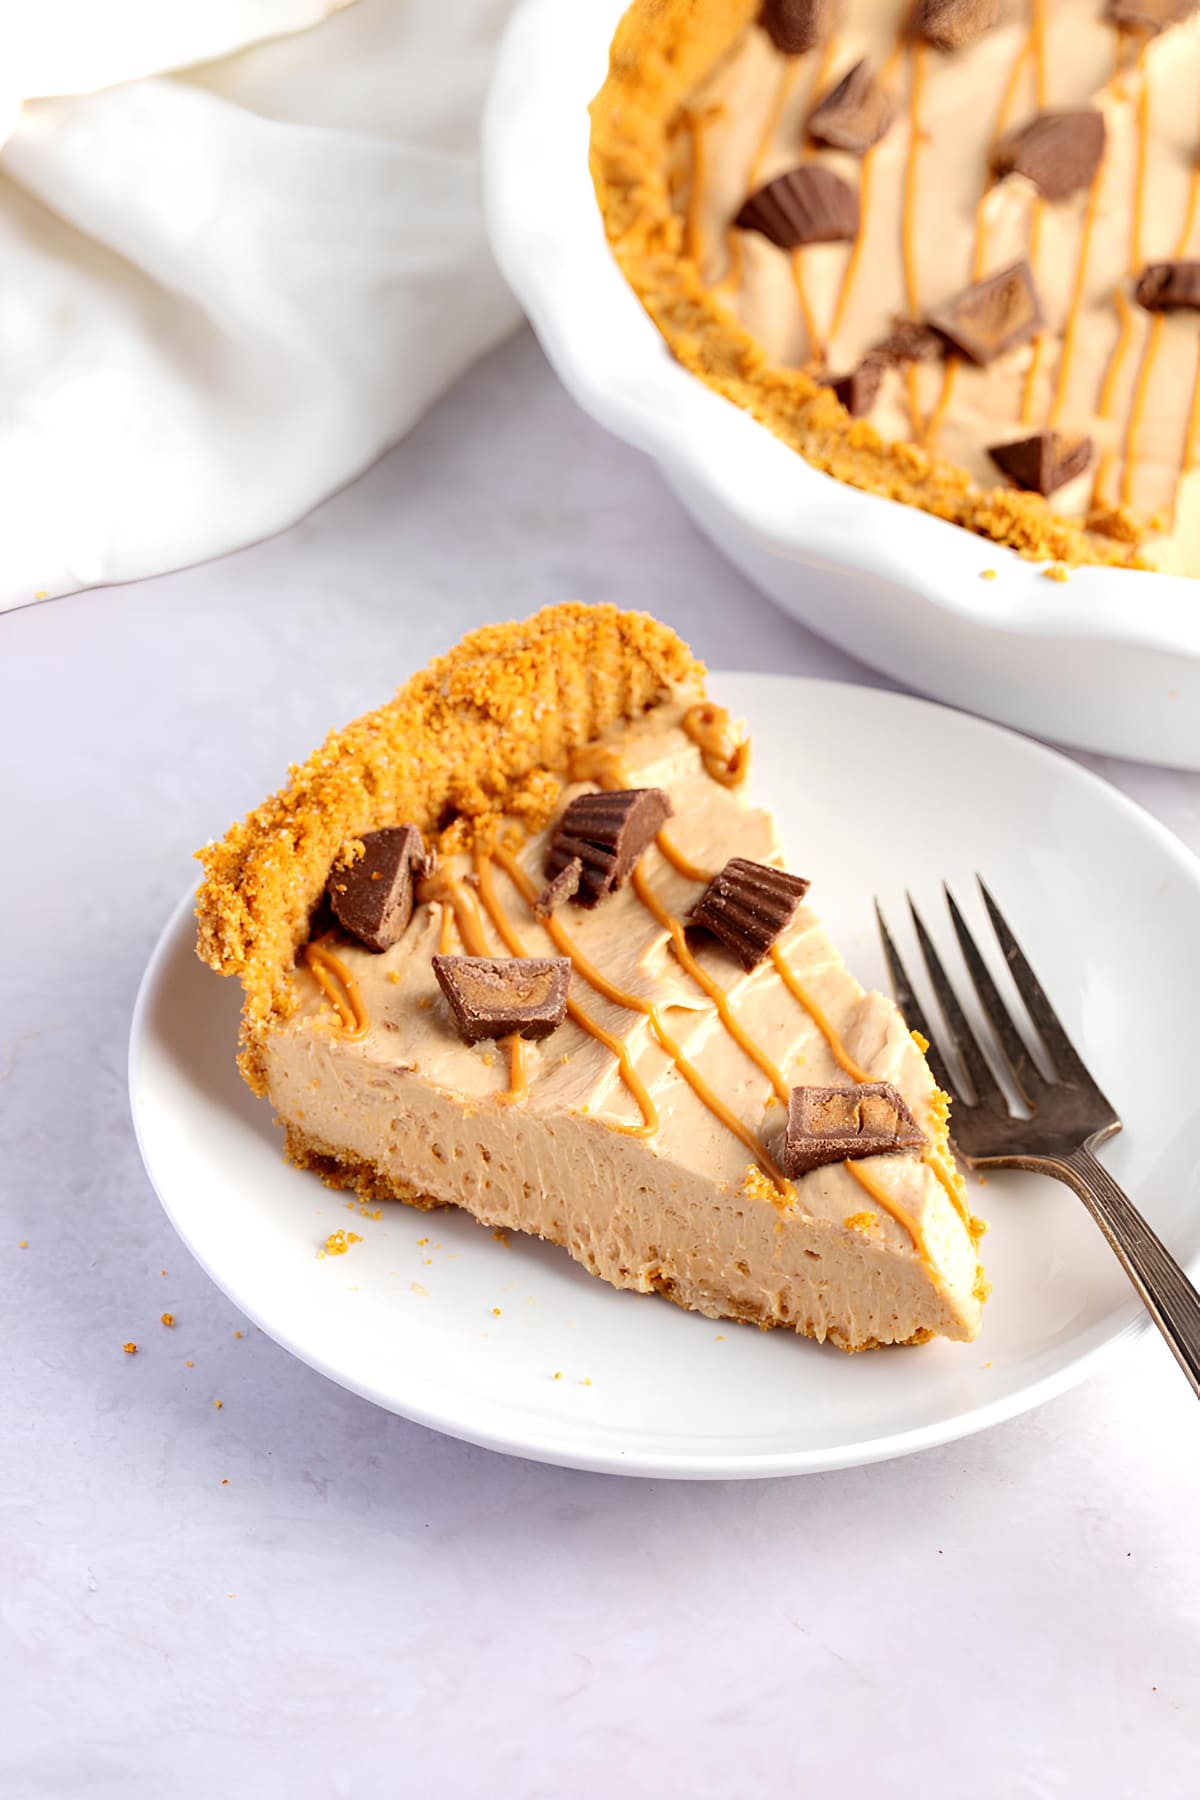 Sliced Homemade No-Bake Peanut Butter Pie in a Plate